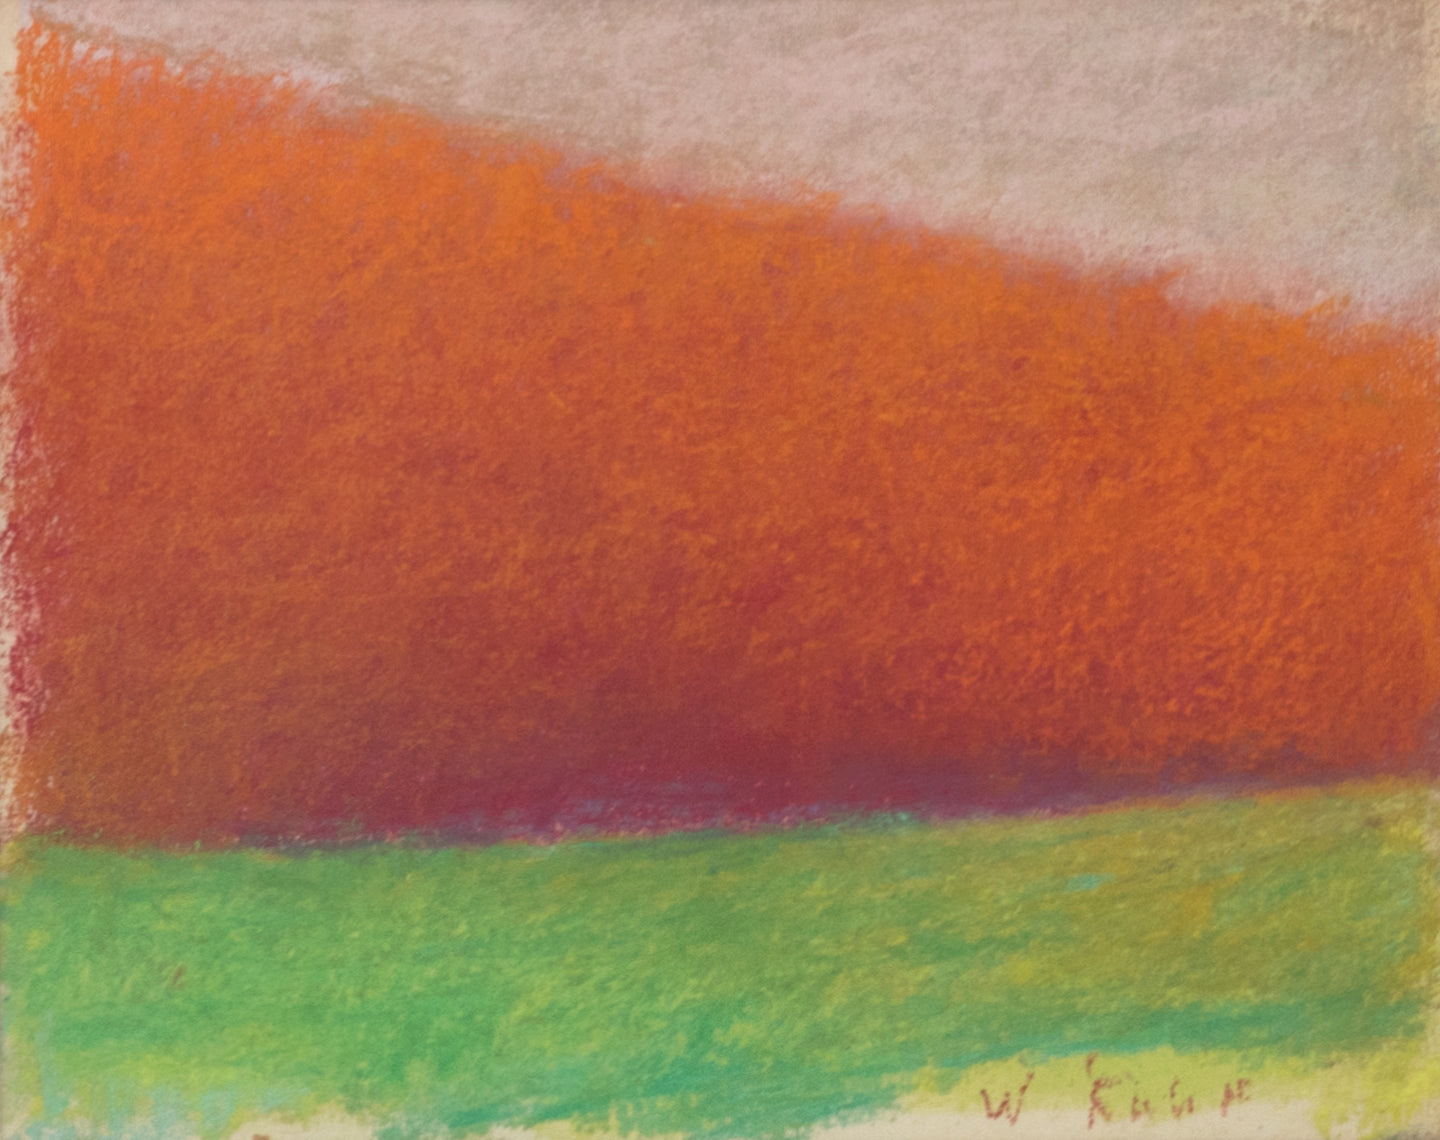 Wolf Kahn (1927-2020) Tree Wedge, Red/Orange, 1994  Pastel on paper  8 x 10 inches This Abstract of a landscape is truly spectacular with its vibrant greens, red, oranges, yellows, and cream. This Wolf Kahn at his best. at Manolis Projects Gallery